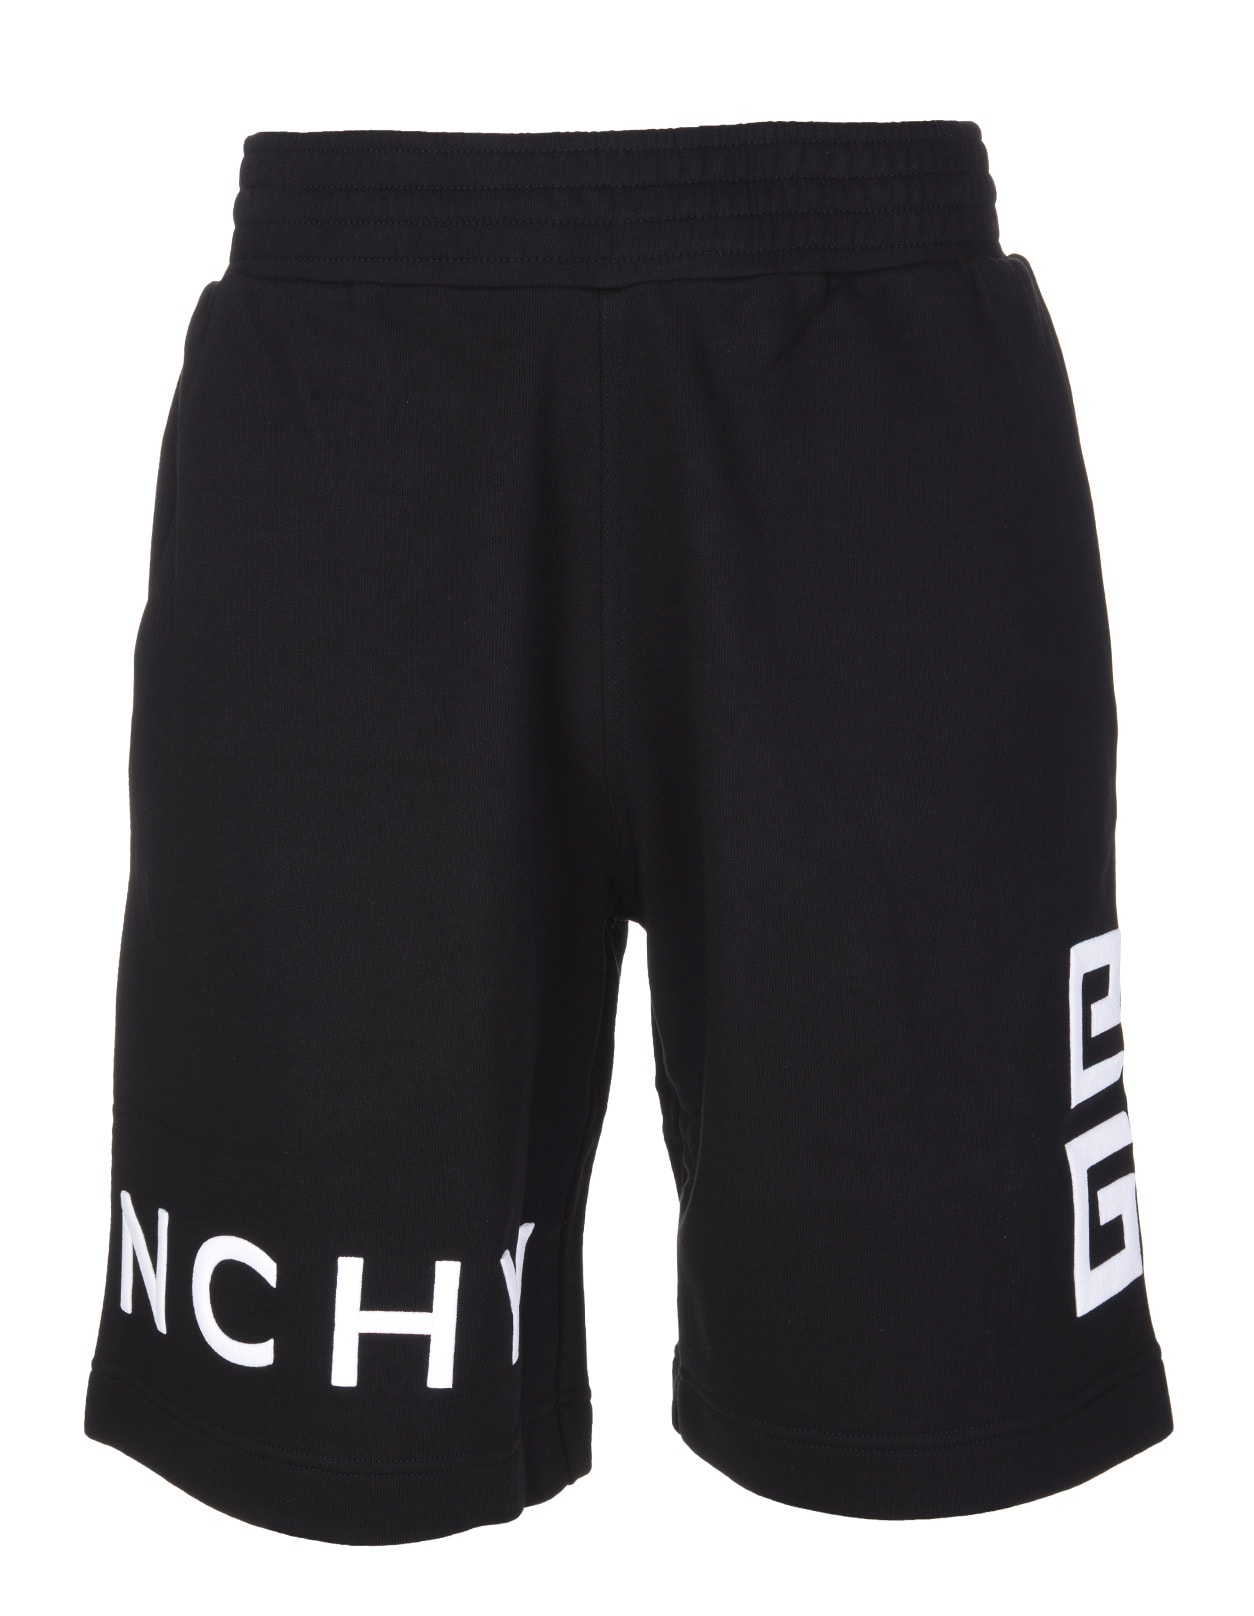 Man Black Bermuda With Givenchy 4g Embroidery